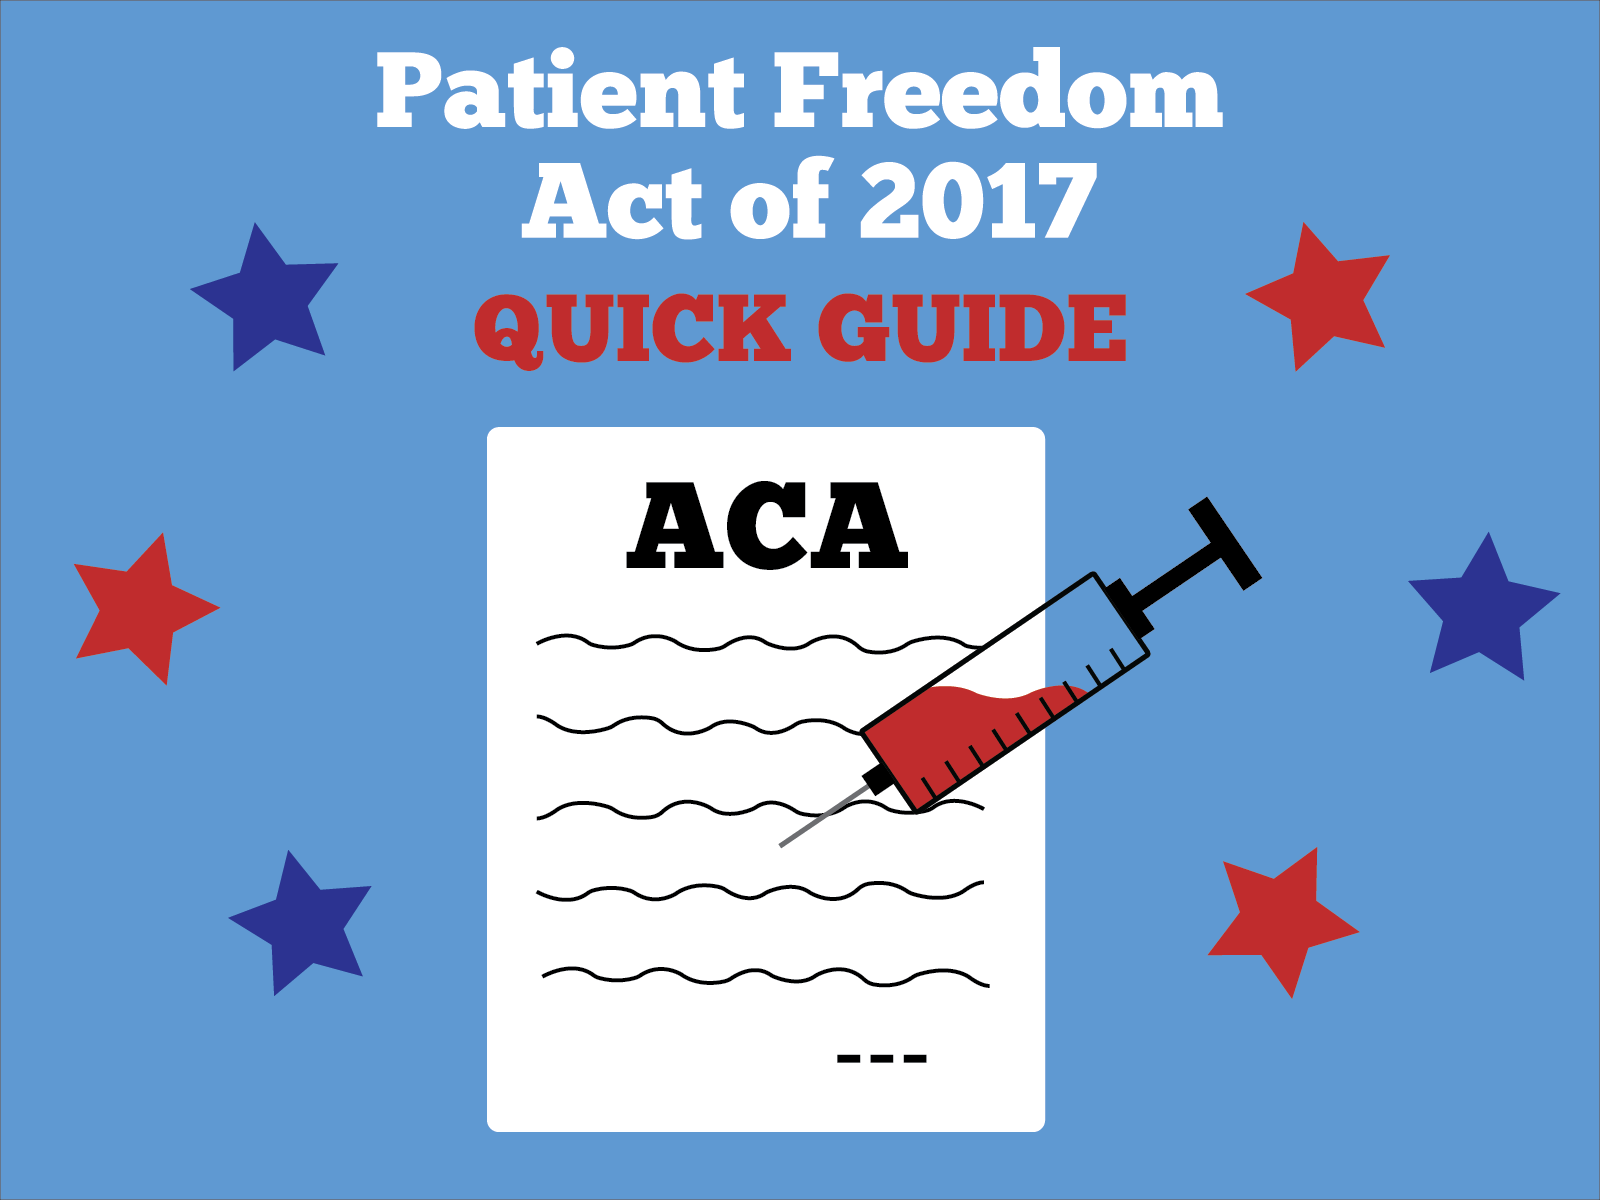 Graphic: Patient Freedom Act of 2017 Quick Guide - a syringe going into a bill titled "ACA" represents healthcare reform. Graphic created by The Signal reporter Krista Kamp.